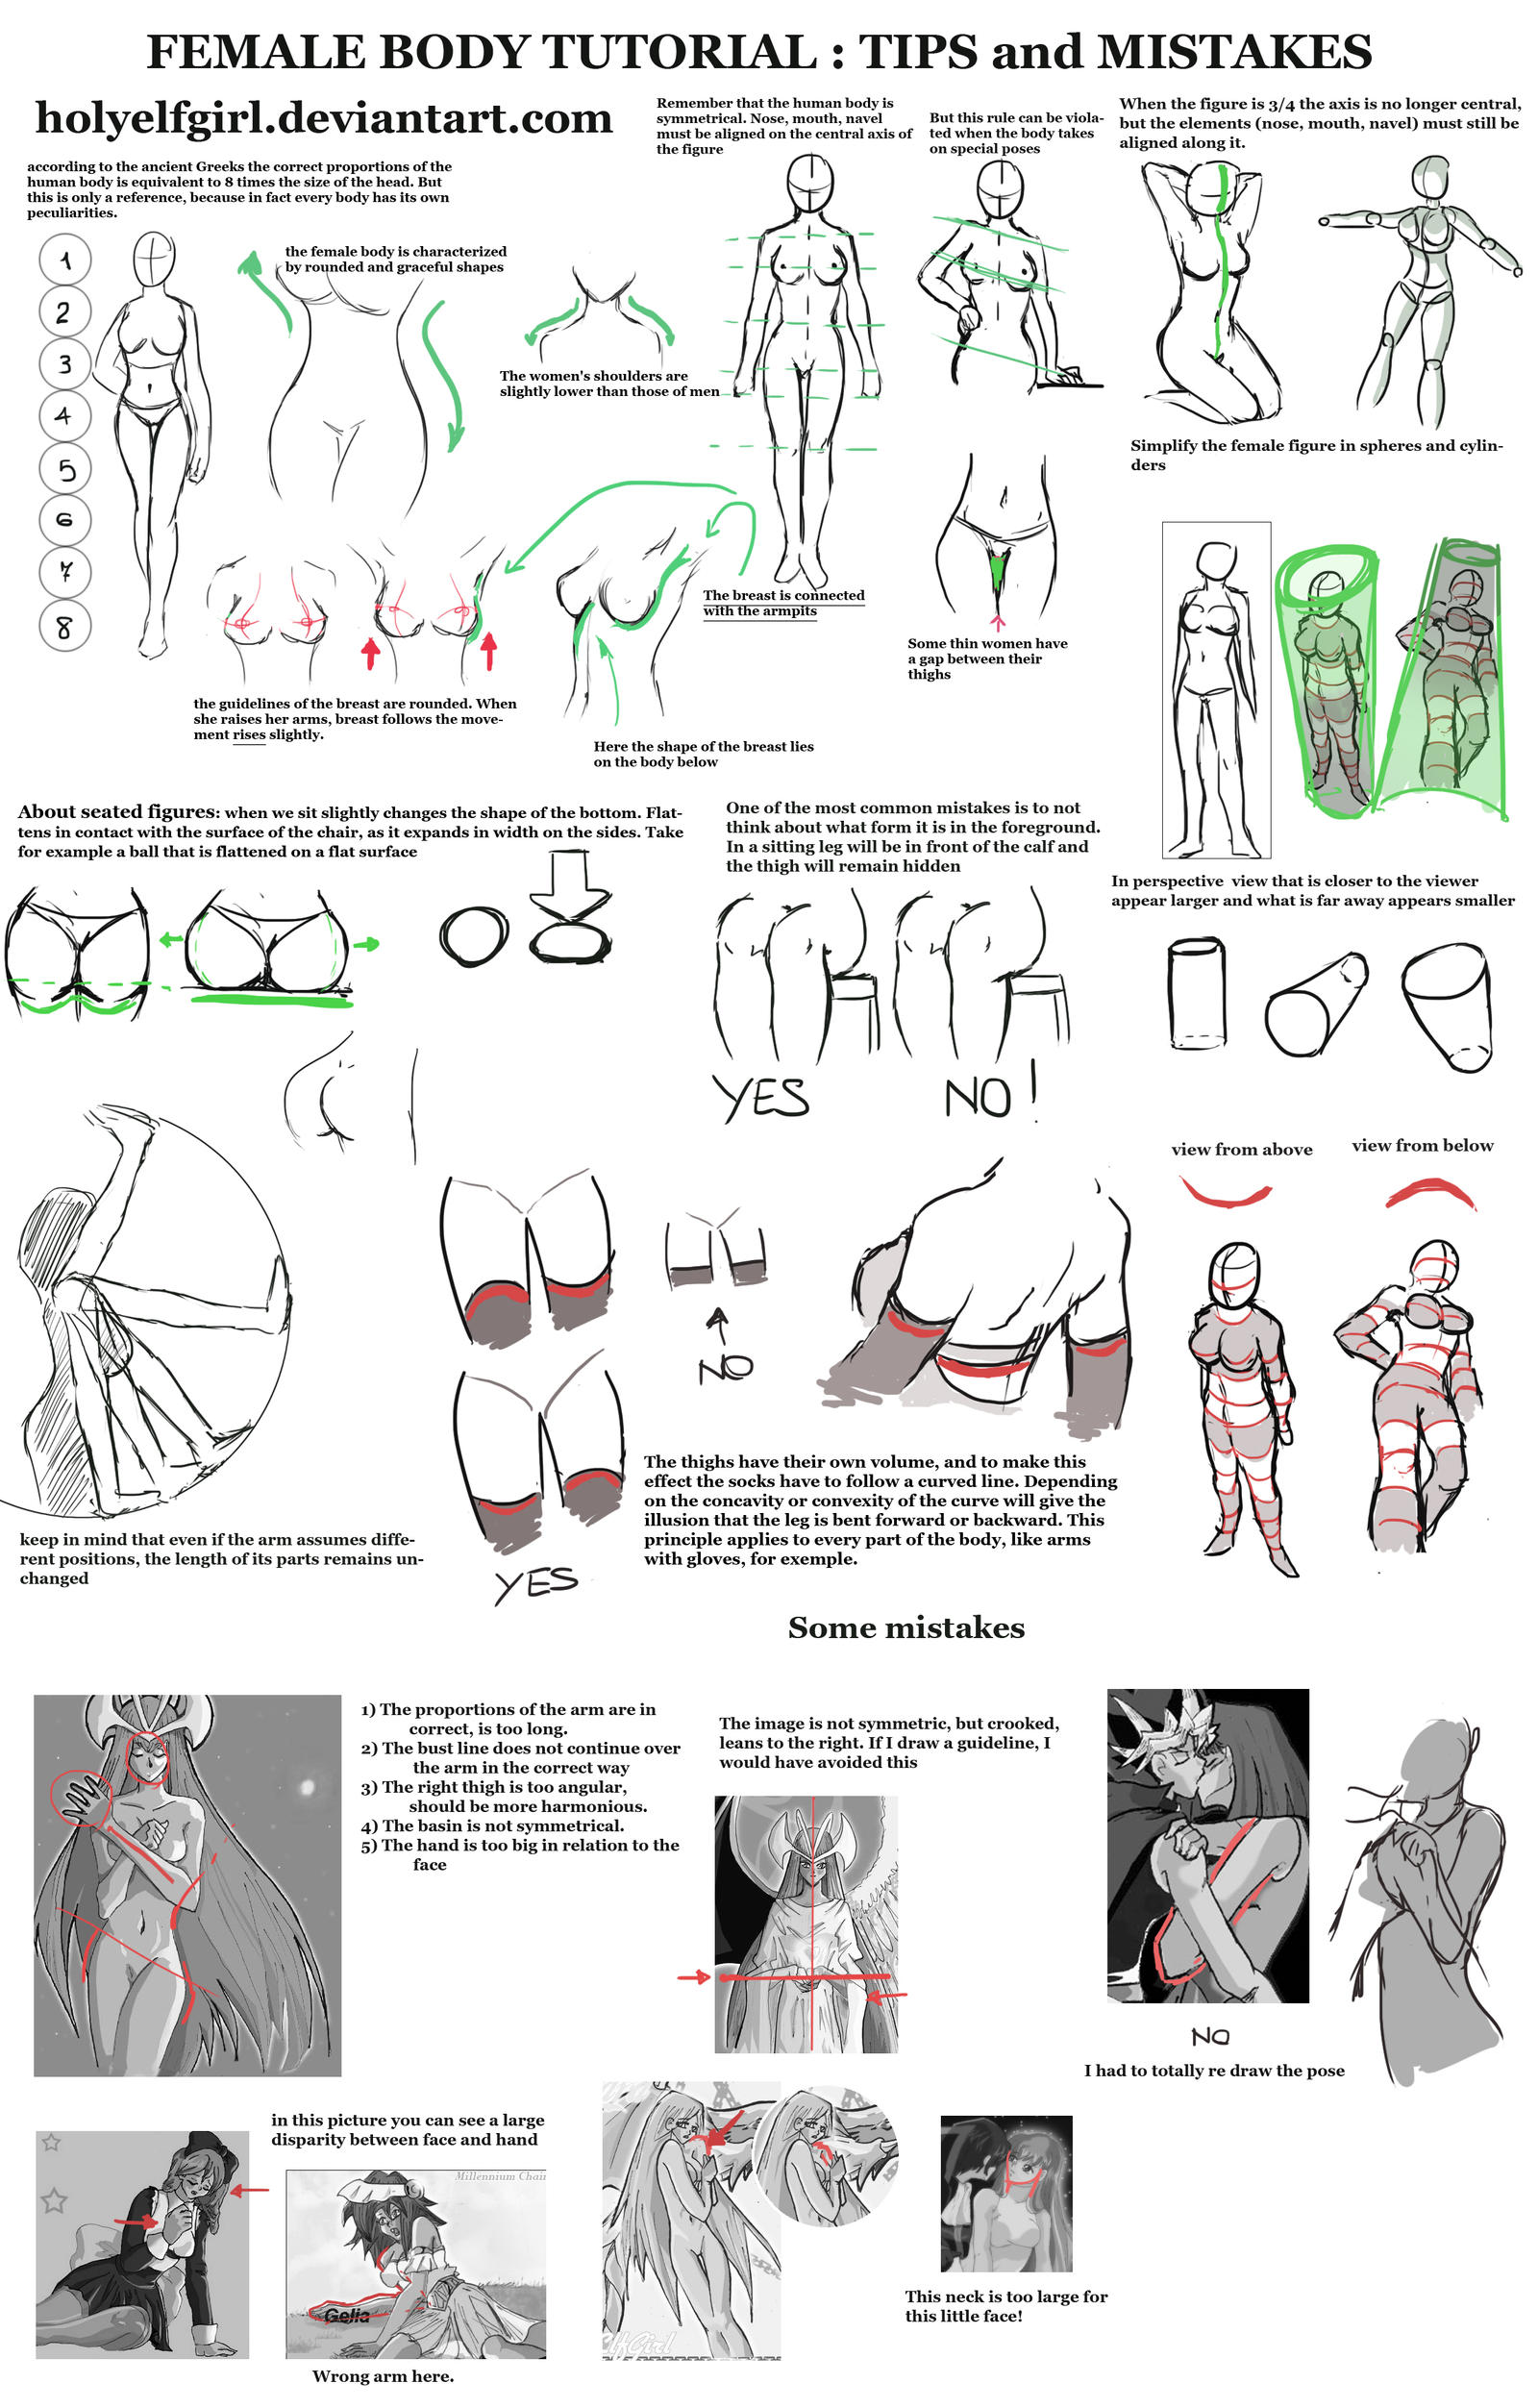 Female body tutorial: Tips and mistakes by HolyElfGirl on DeviantArt